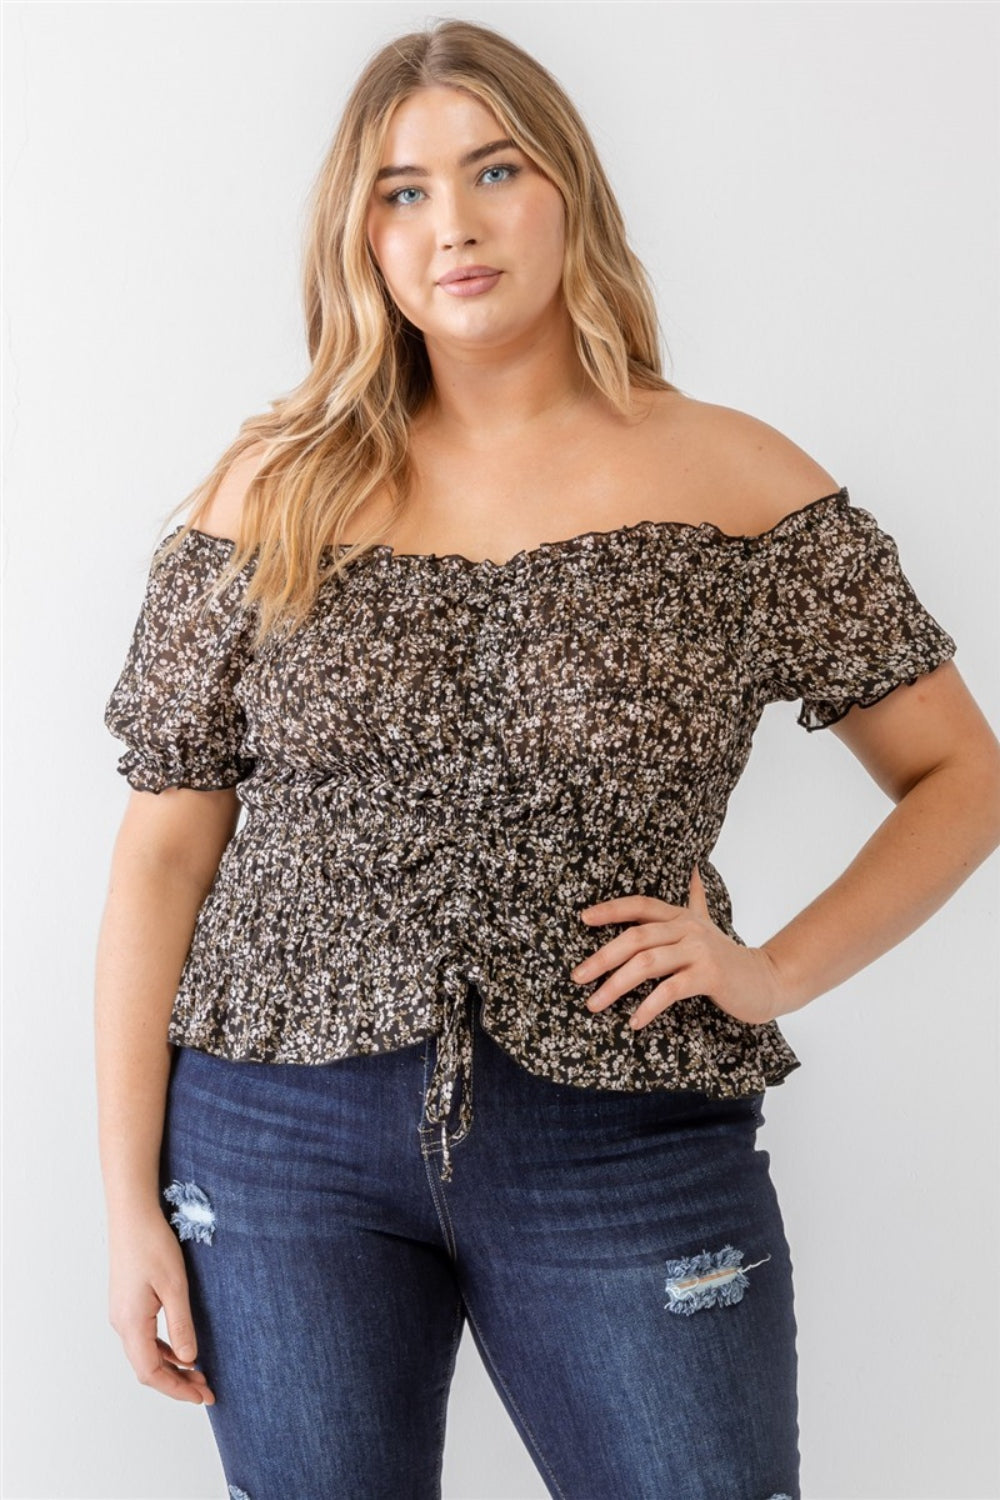 Zenobia Plus Size Frill Ruched Off-Shoulder Short Sleeve Blouse - Thandynie